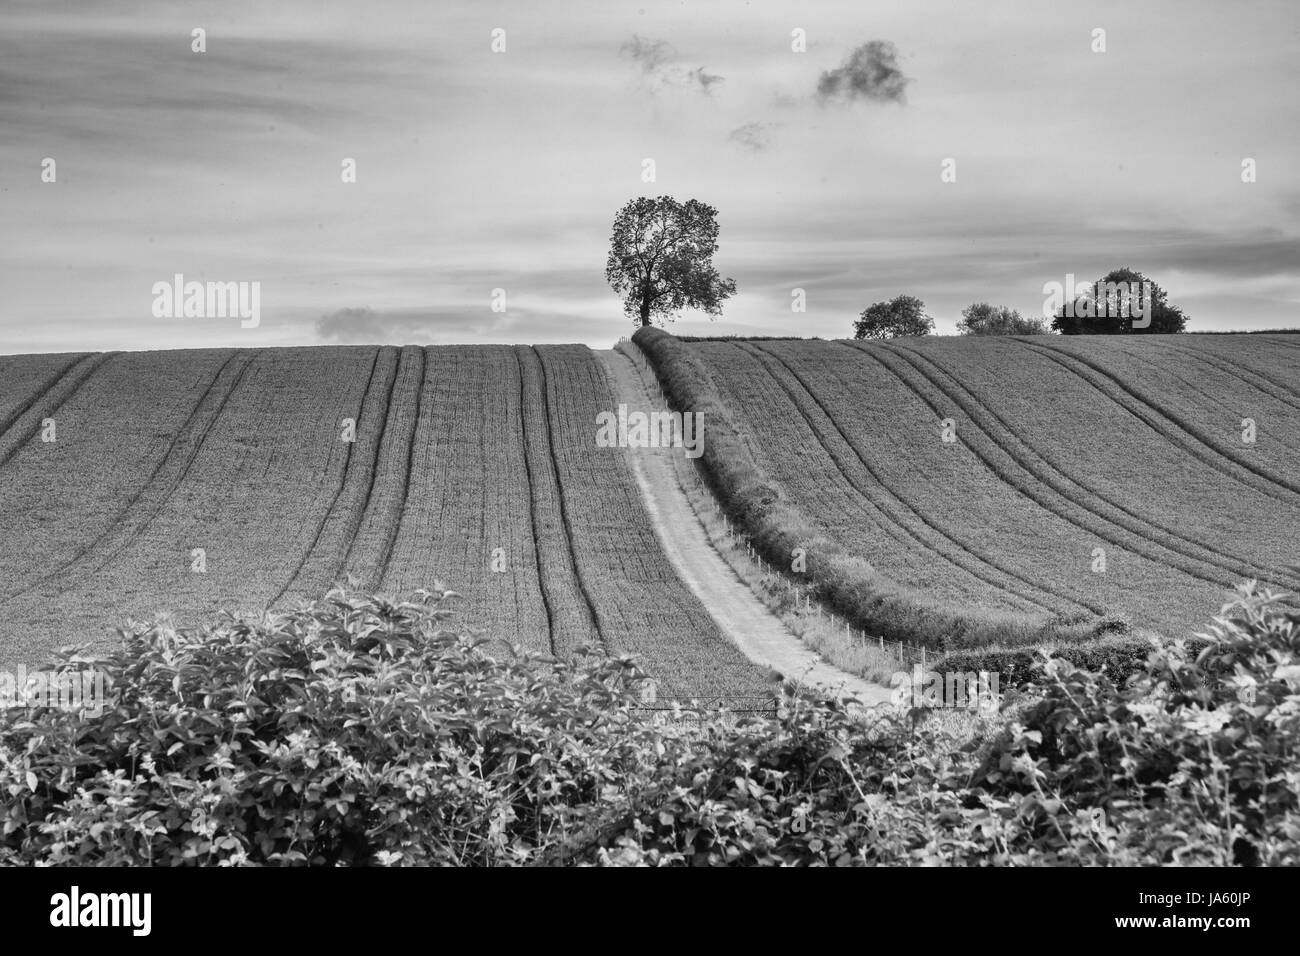 A single tree on the brow of a hilly field in the middle of the picture. A hedge is going towards the tree. Black and white. Stock Photo